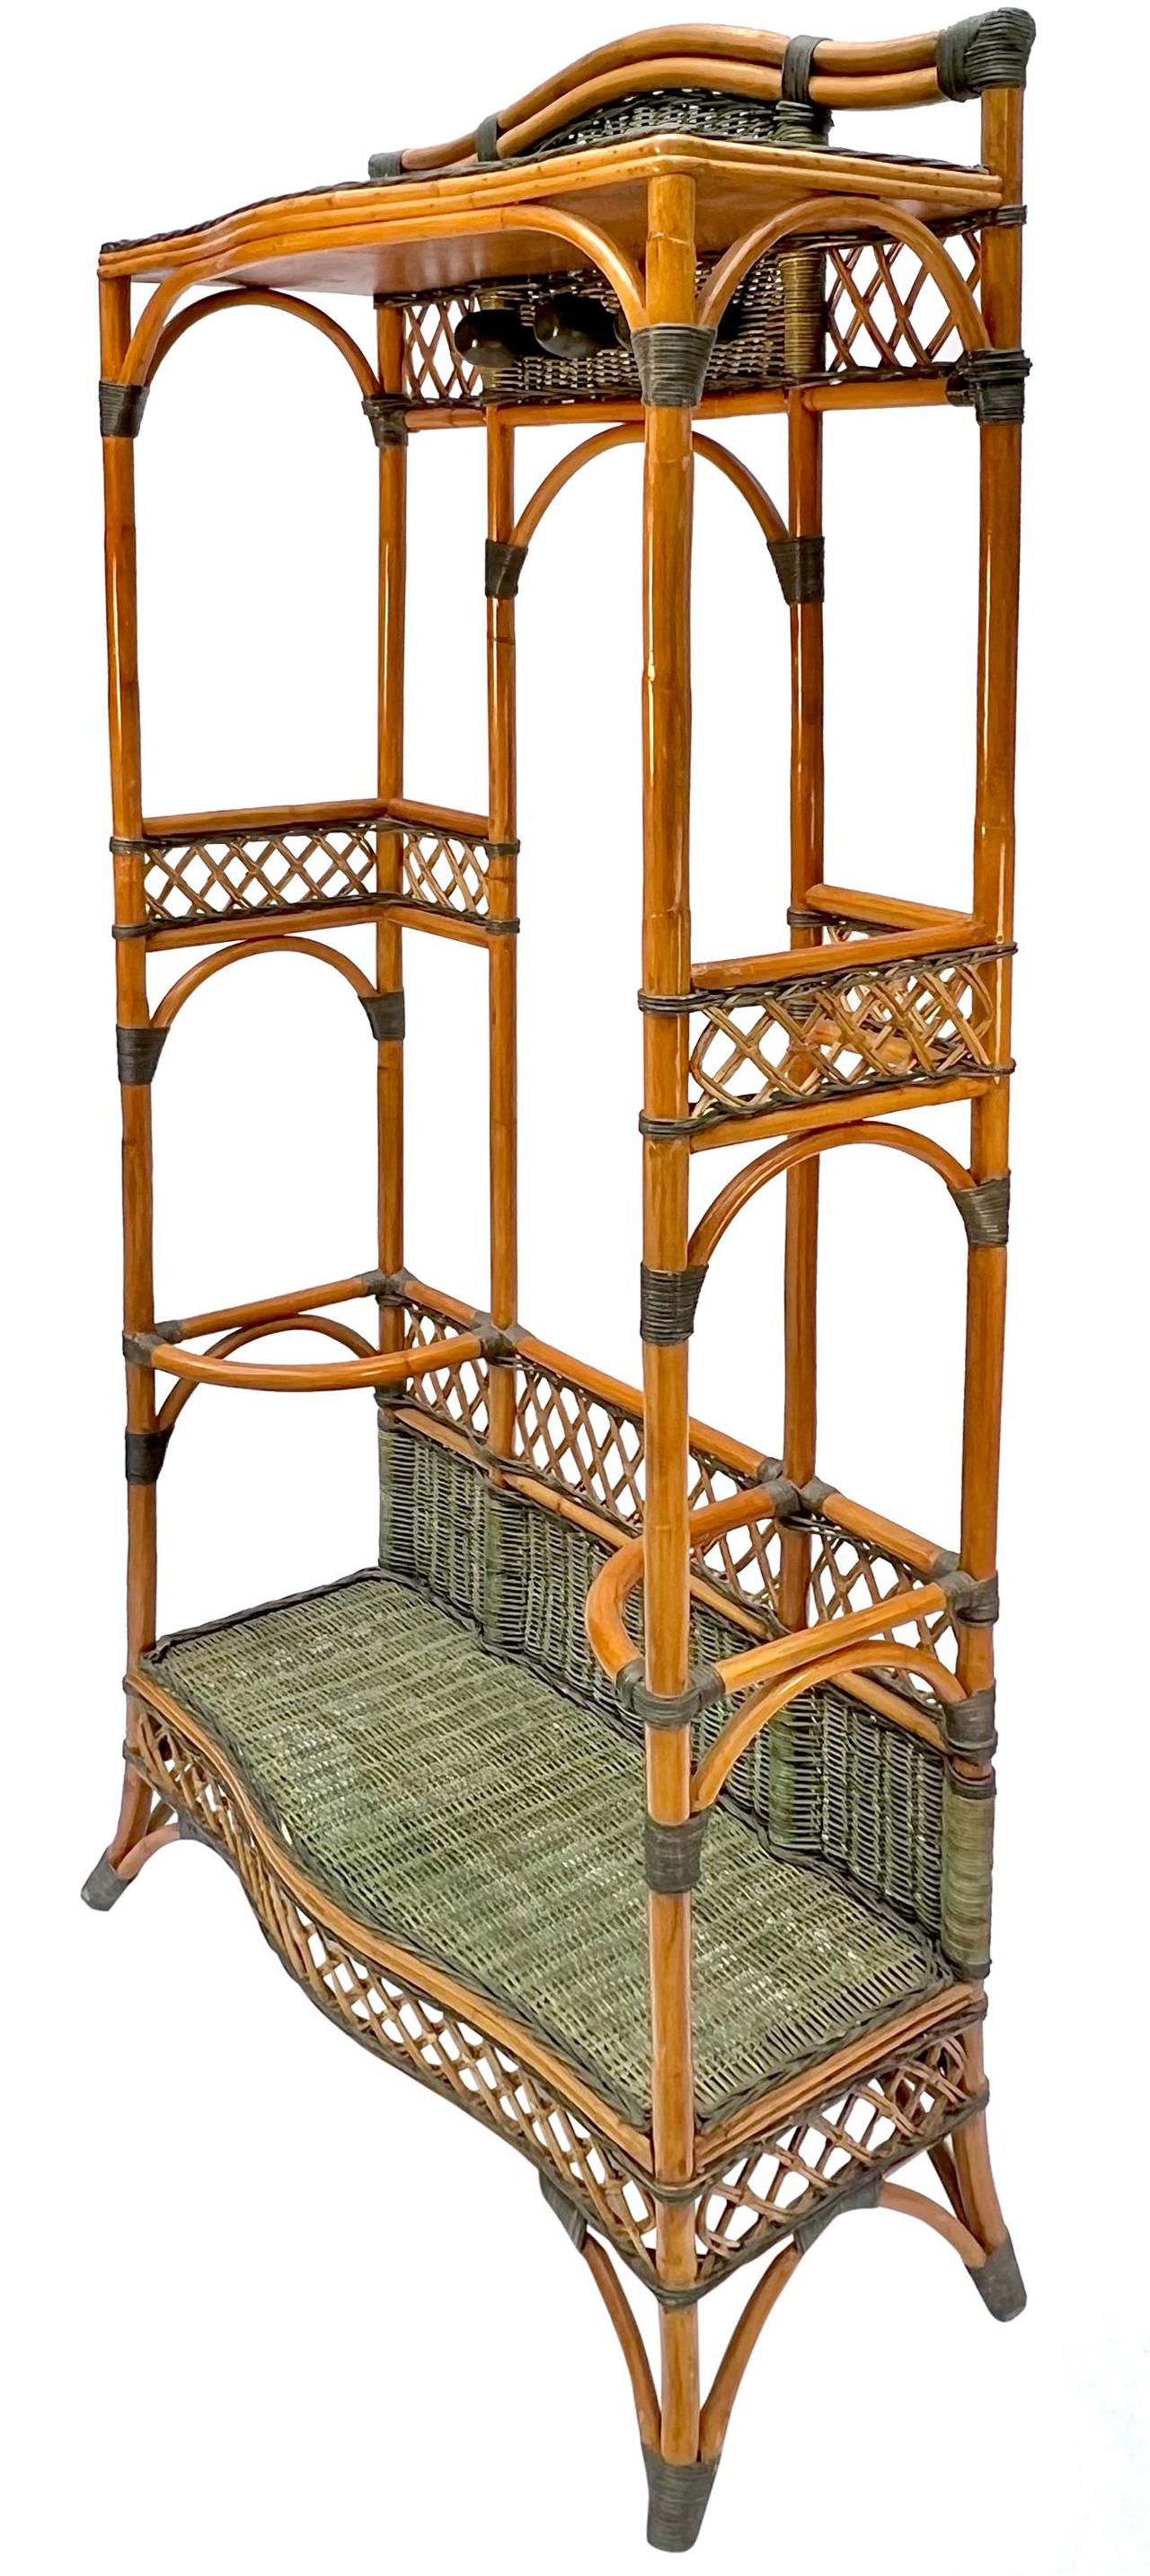 Vintage French rattan coat hat rack hall stand with Umbrella holders

Offered for sale is a circa 1980s French rattan hall stand with two-tone rattan. The hall stand has coat and hat hooks plus umbrella holders on either side. This is a great